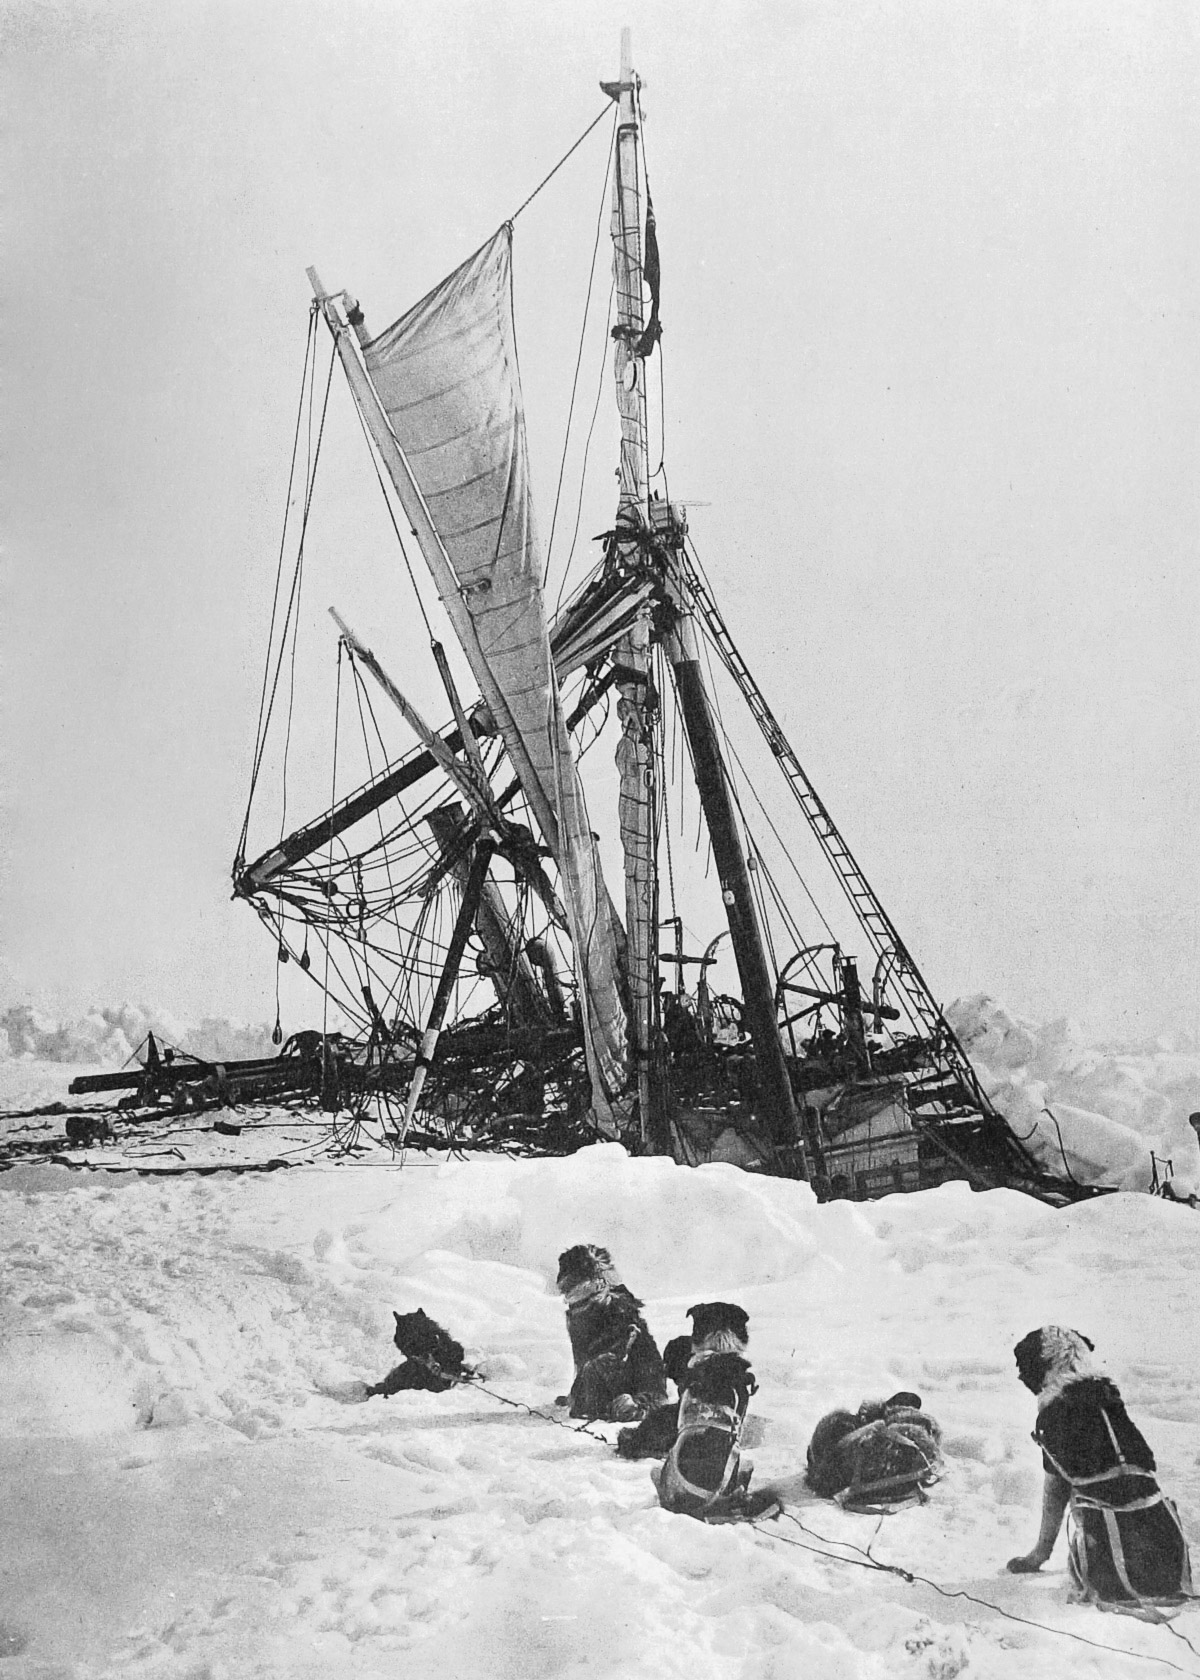 The wrecked ship of the Shackleton's Antarctic expedition, SS Endurance, stuck in the ice in the Weddell Sea, circa January 1915. (Photo by Royal Geographic Society)